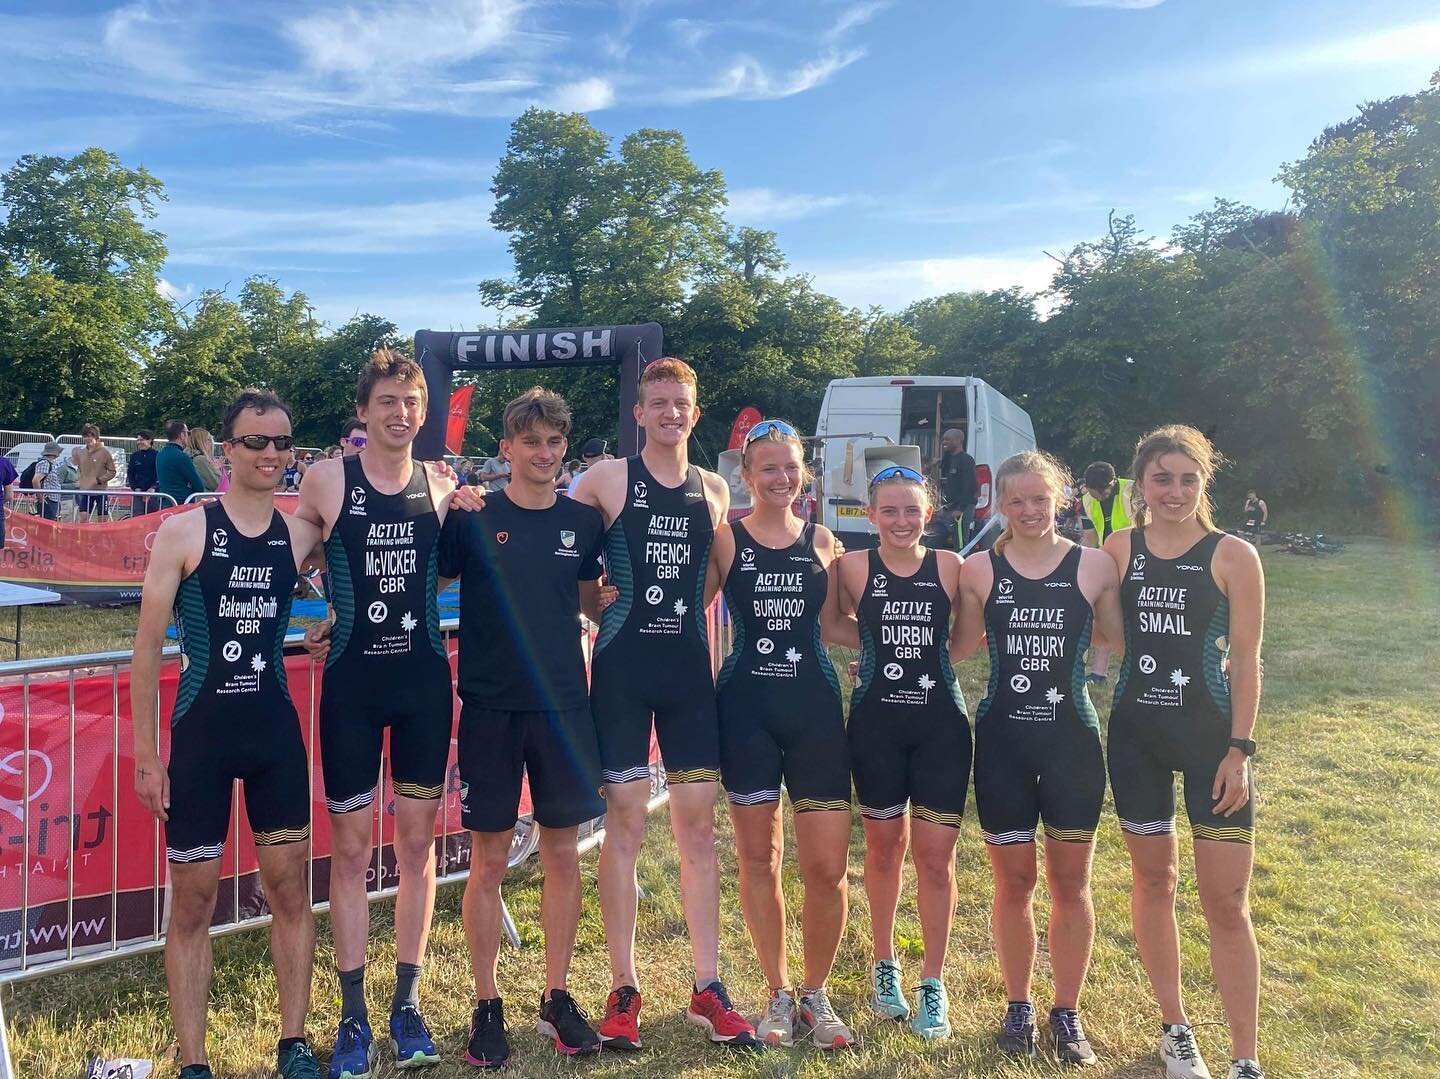 💚💛 BUCS Standard Triathlon 💚💛
.
Last Saturday saw our final BUCS race of the 2021/22 year. The race consisted of a 1500m open water swim, 38km bike and 10km run. Everyone competing did extremely well with many being their first time competing at 